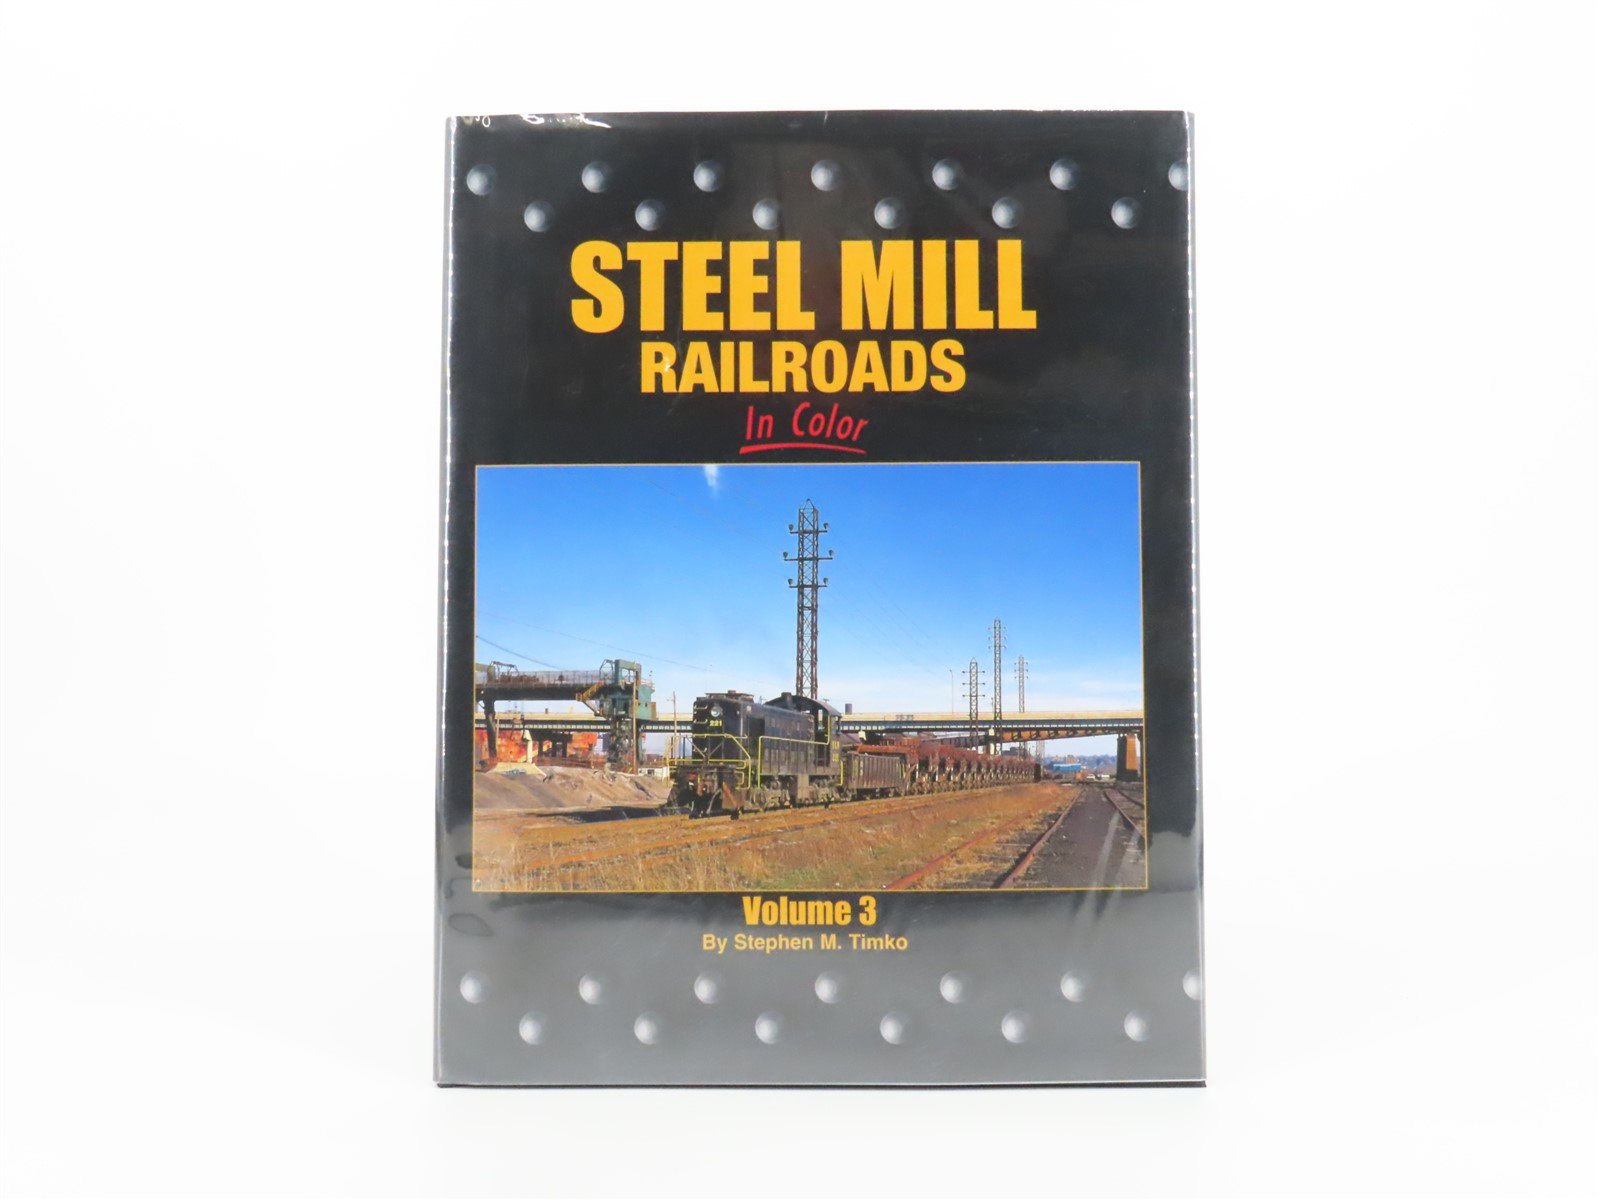 Morning Sun: Steel Mill Railroads In Color Vol. 3 by S.M. Timko ©2009 HC Book